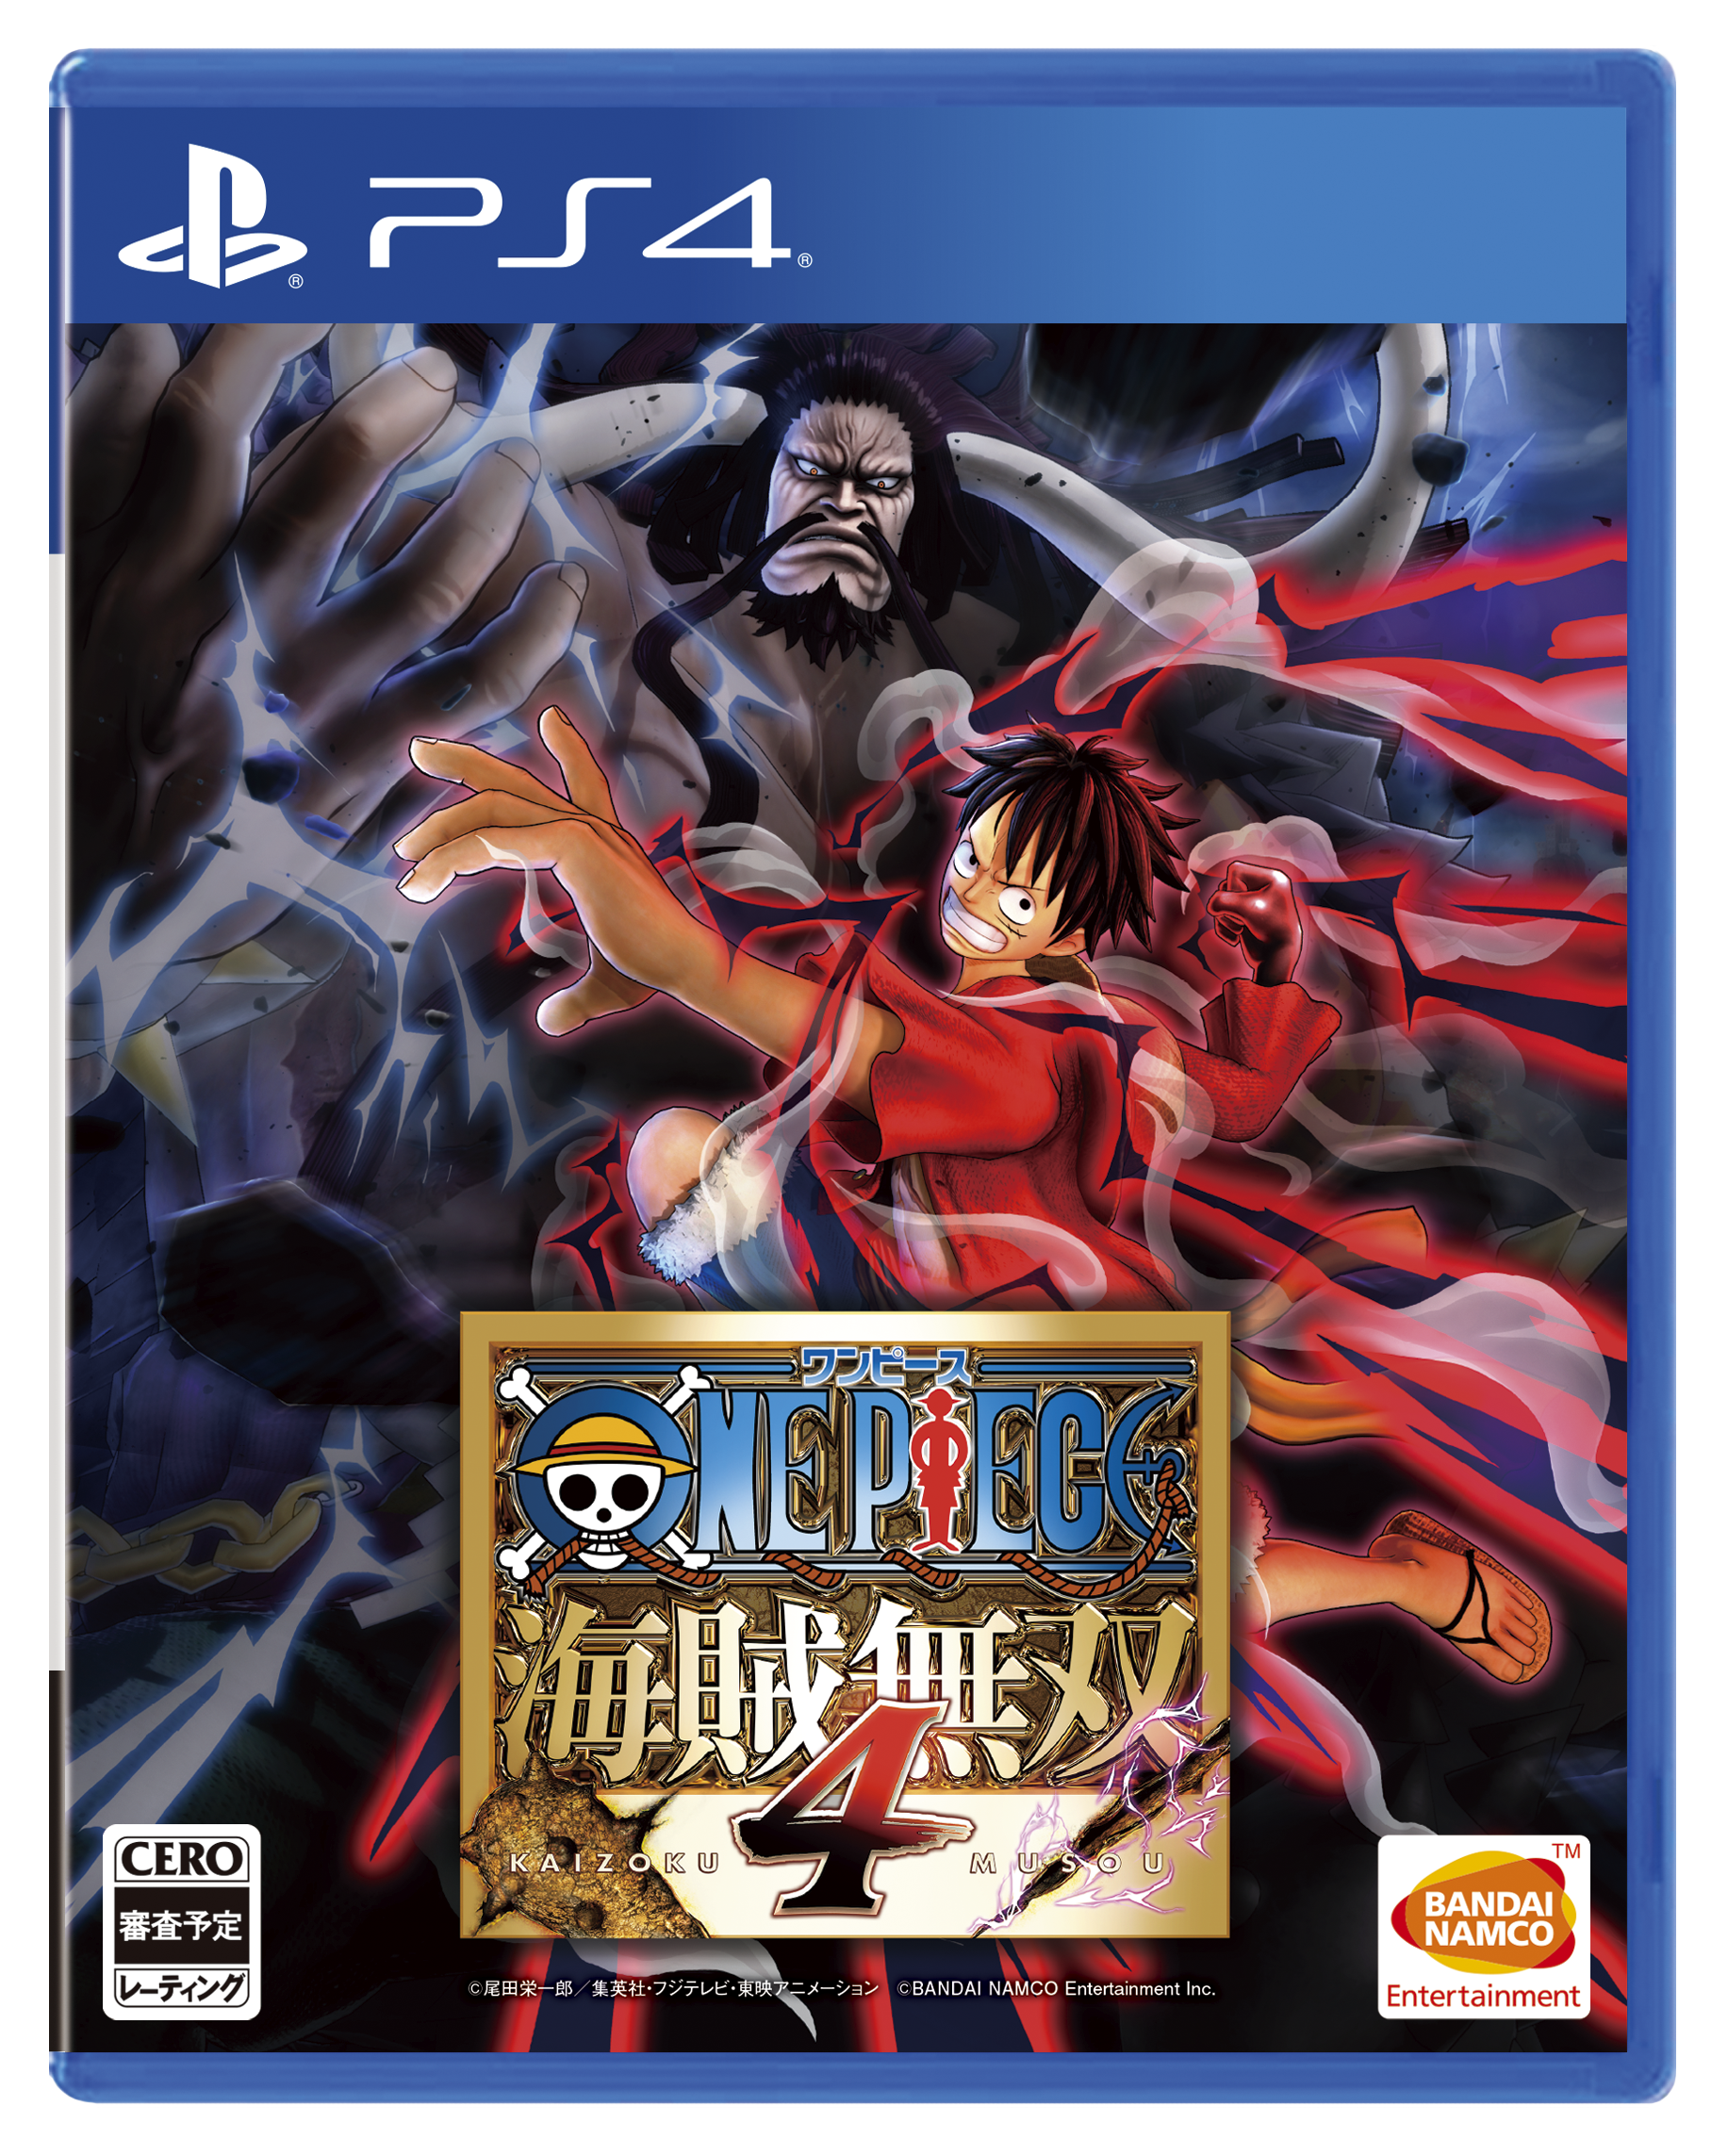 Ps4 One Piece 海賊無双4 One Piece ワンピース バンダイナムコグループ公式通販サイト